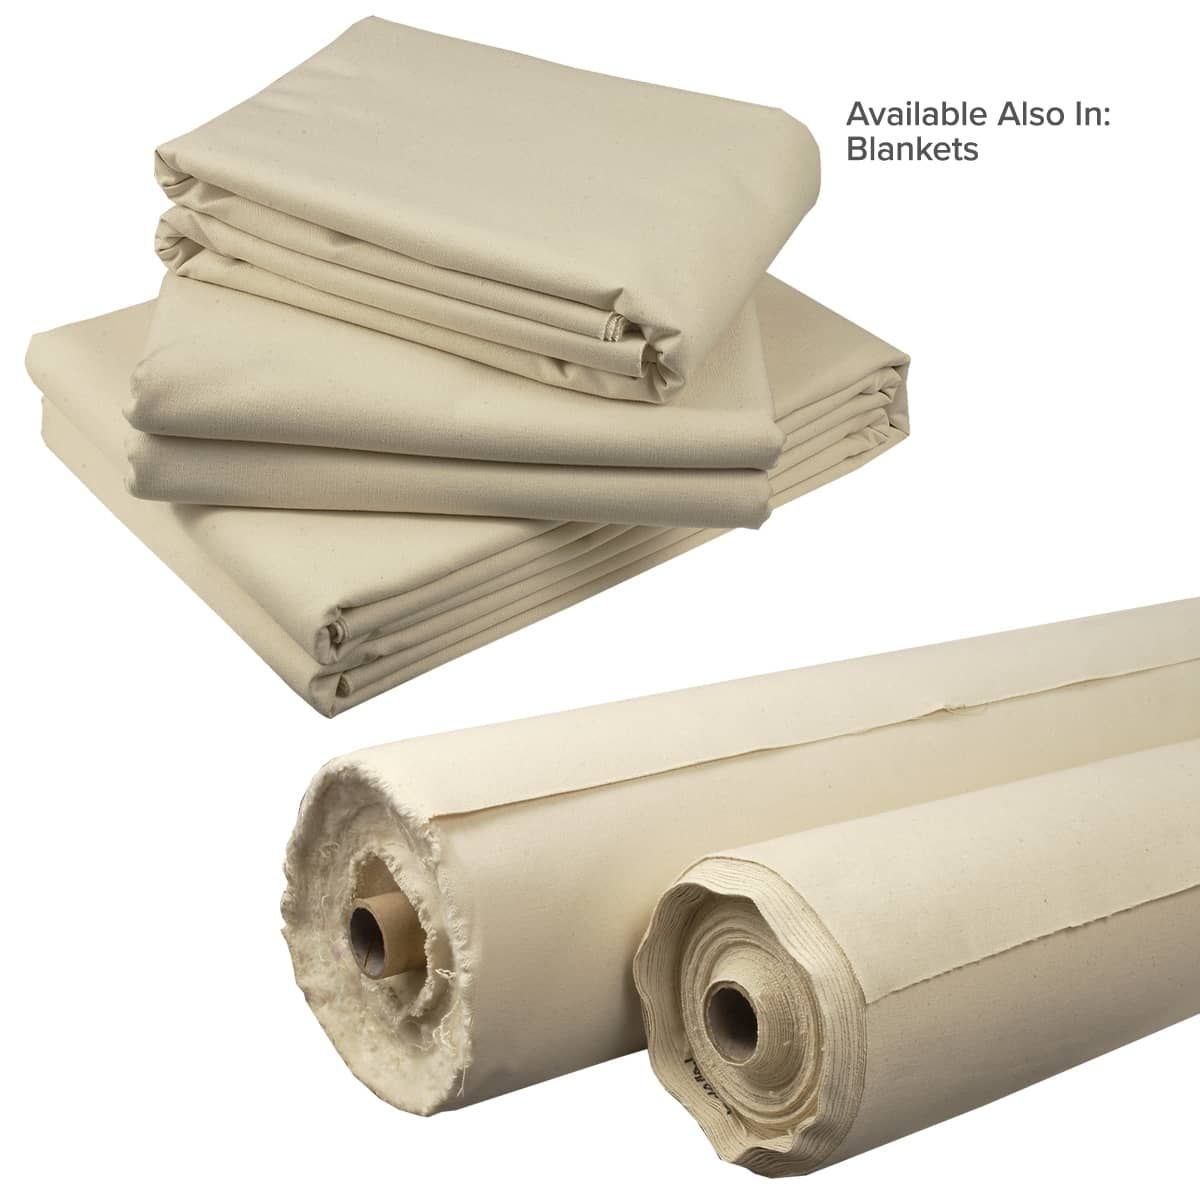 Professional Cotton Duck Canvas Rolls At An Amazing Value!, Rolls or Blankets